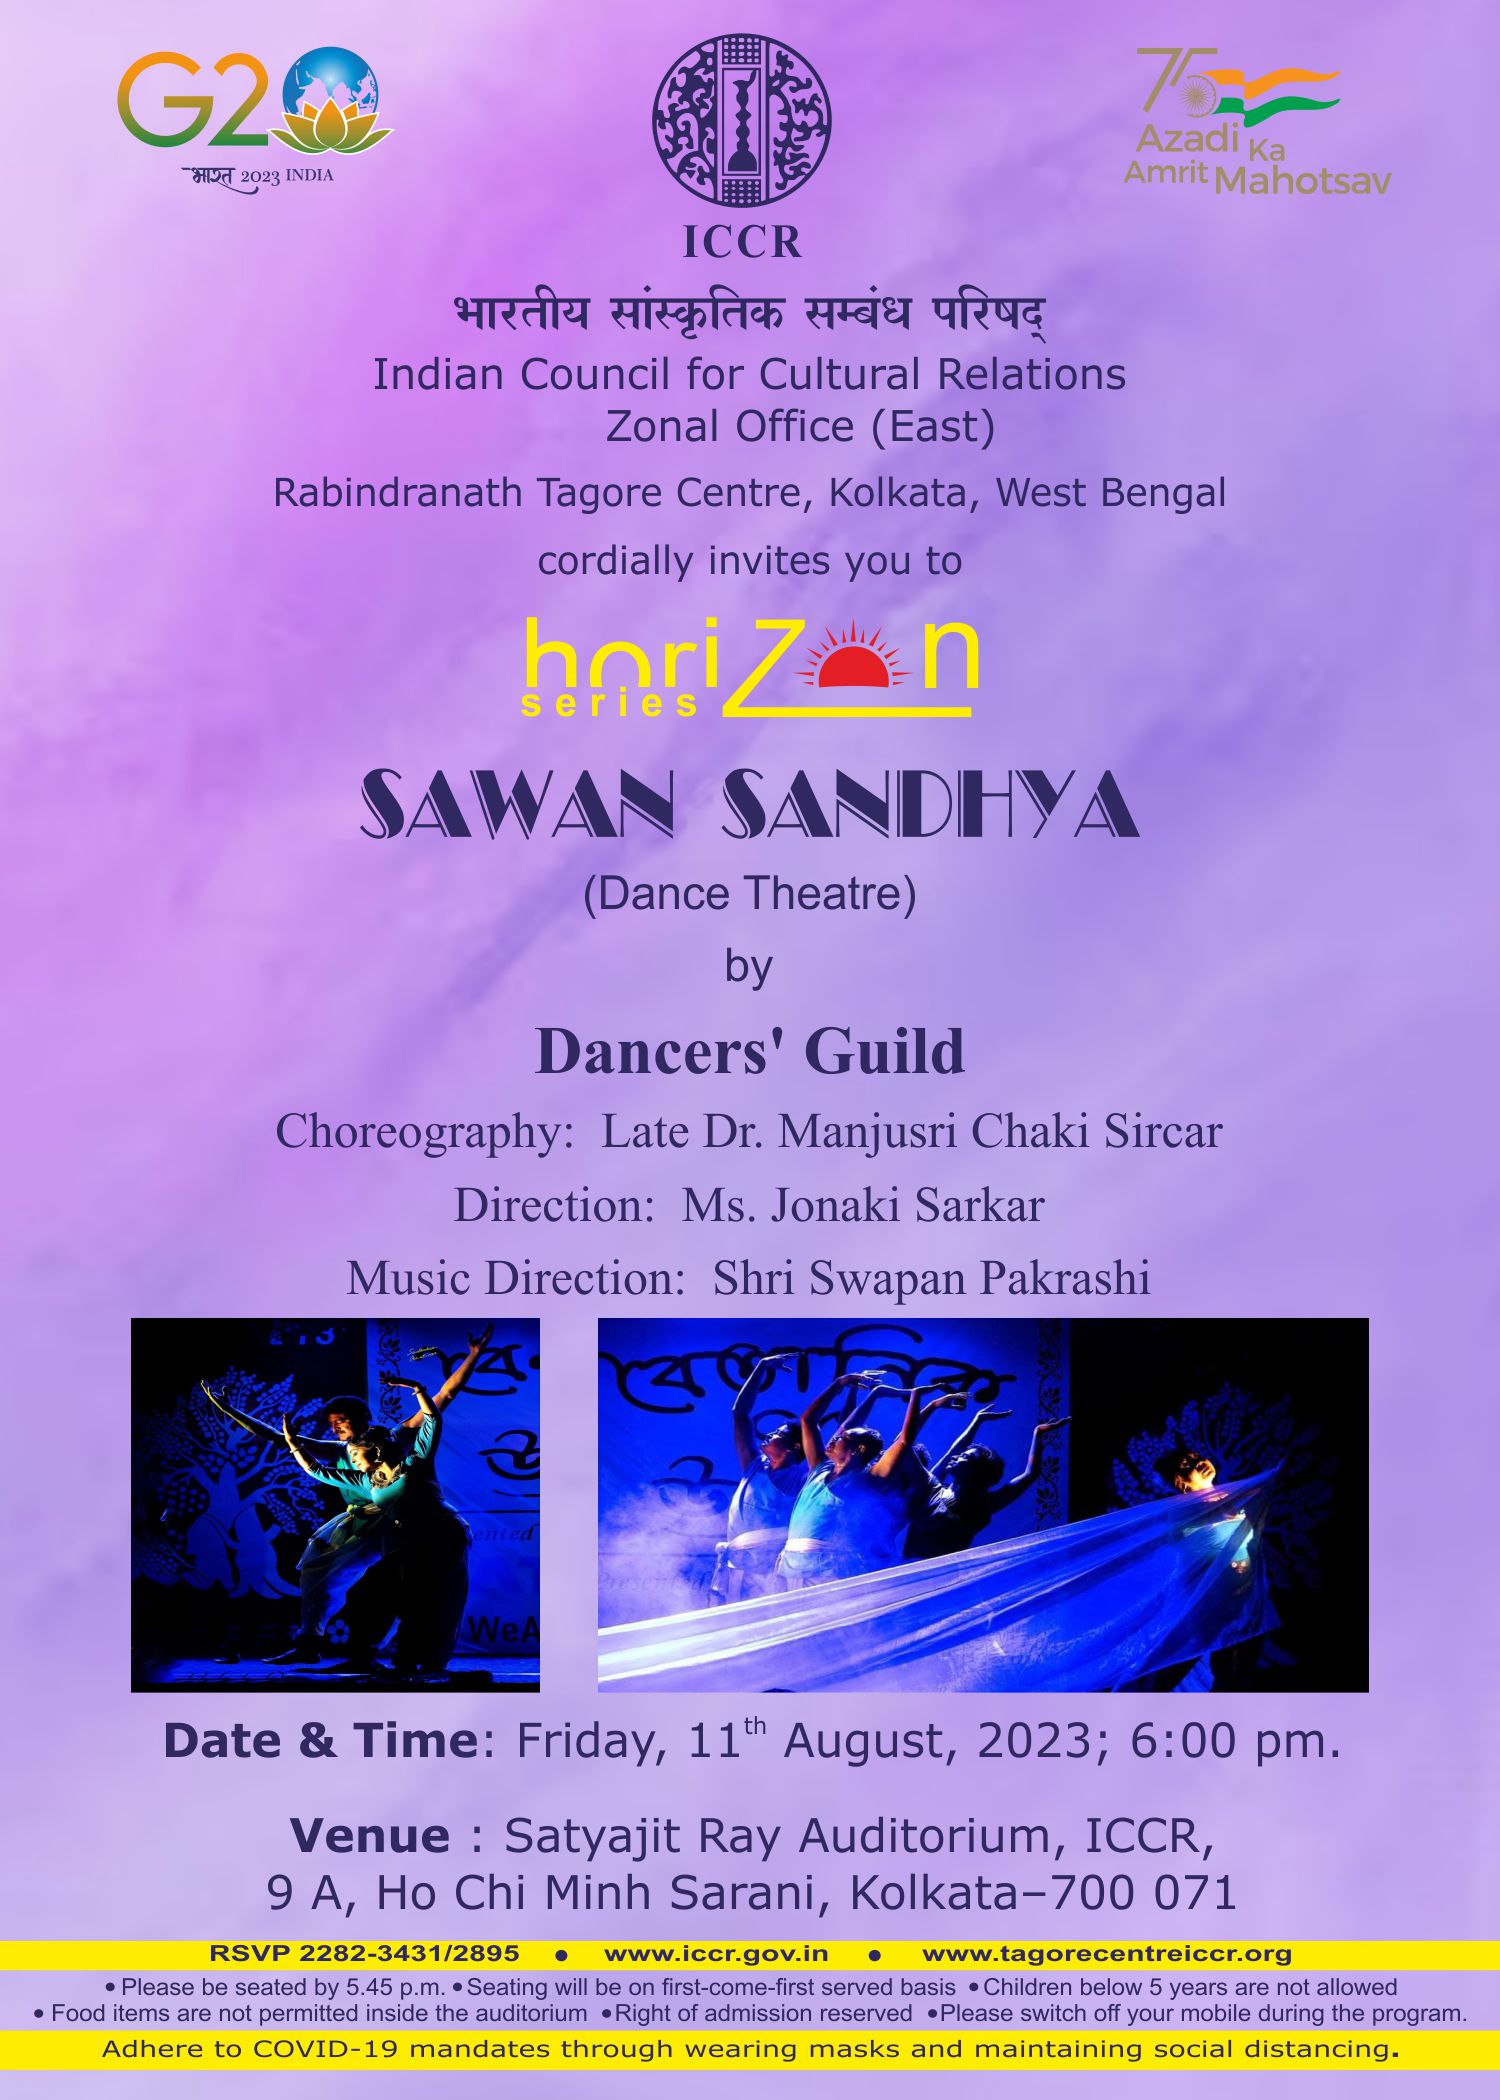 Indian Council for Cultural Relations (ICCR), Zonal Office (East), Kolkata cordially invites you to “SAWAN SANDHYA” dance theatre by Dancers’ Guild, Kolkata on Friday, 11th August, 2023; 6:00 pm at Satyajit Ray Auditorium, Rabindranath Tagore Centre, 9 A Ho Chi Minh Sarani, Kolkata - 700071. Letter of invitation enclosed.